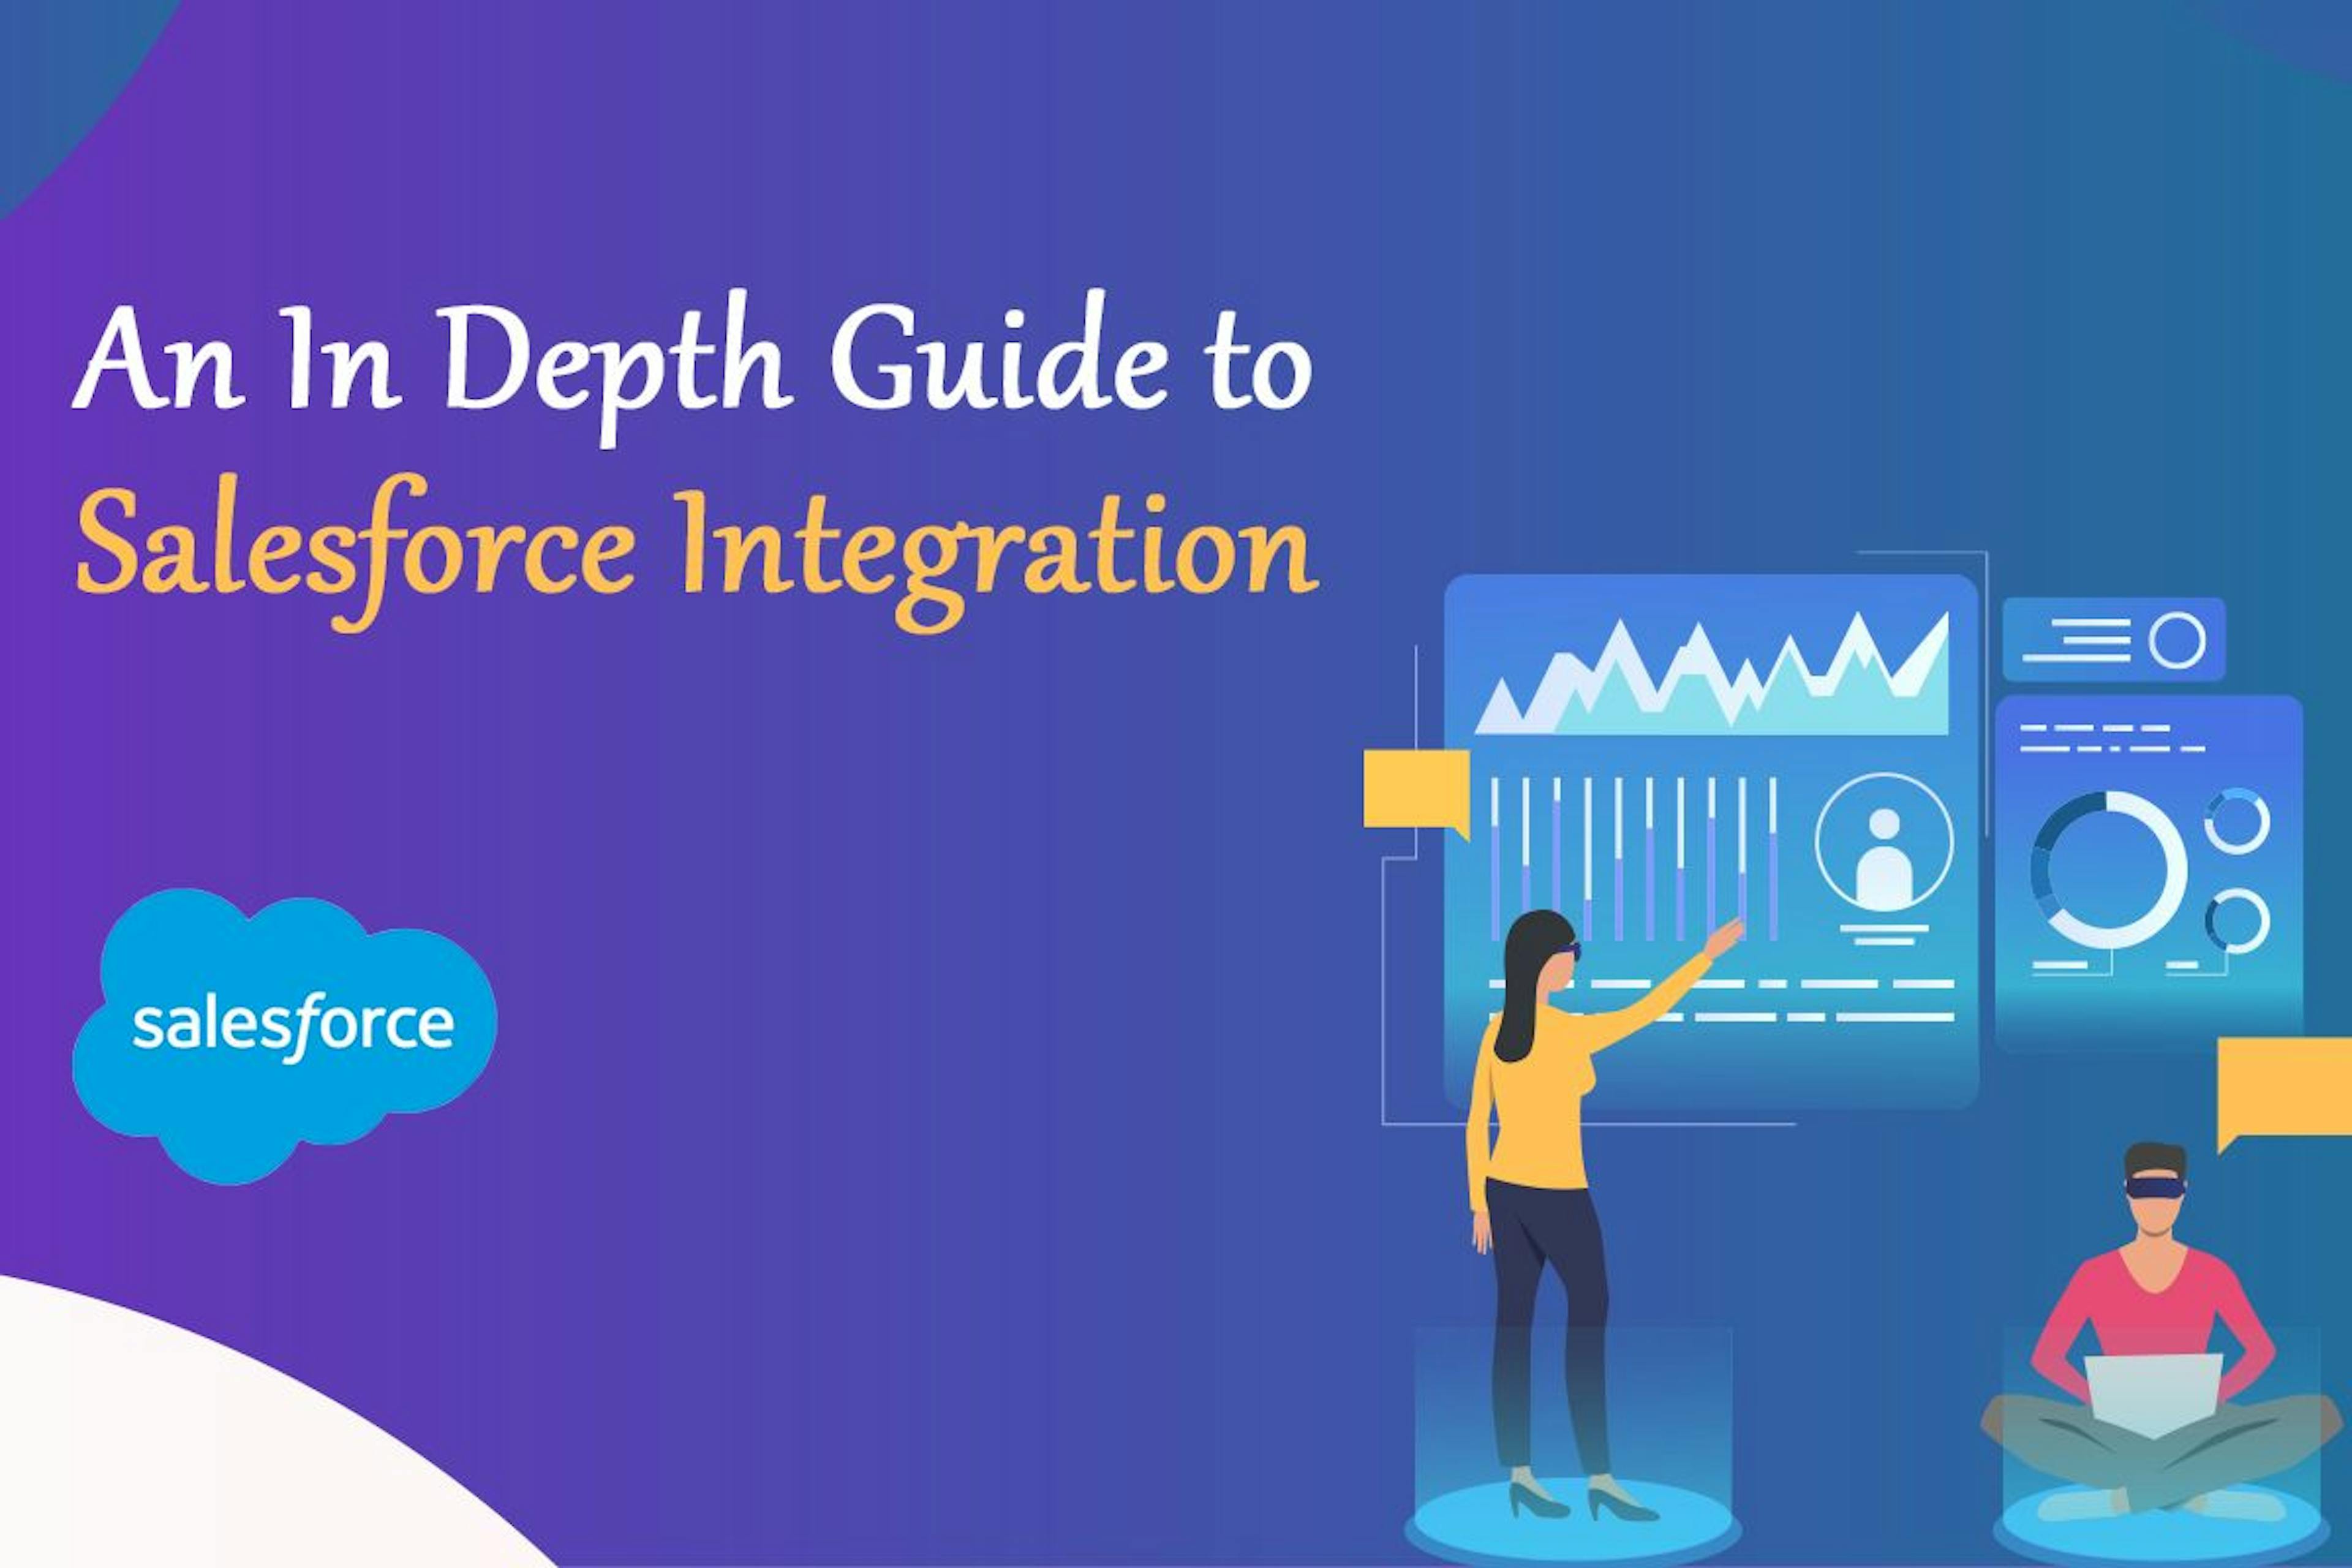 /an-in-depth-guide-to-salesforce-integration feature image